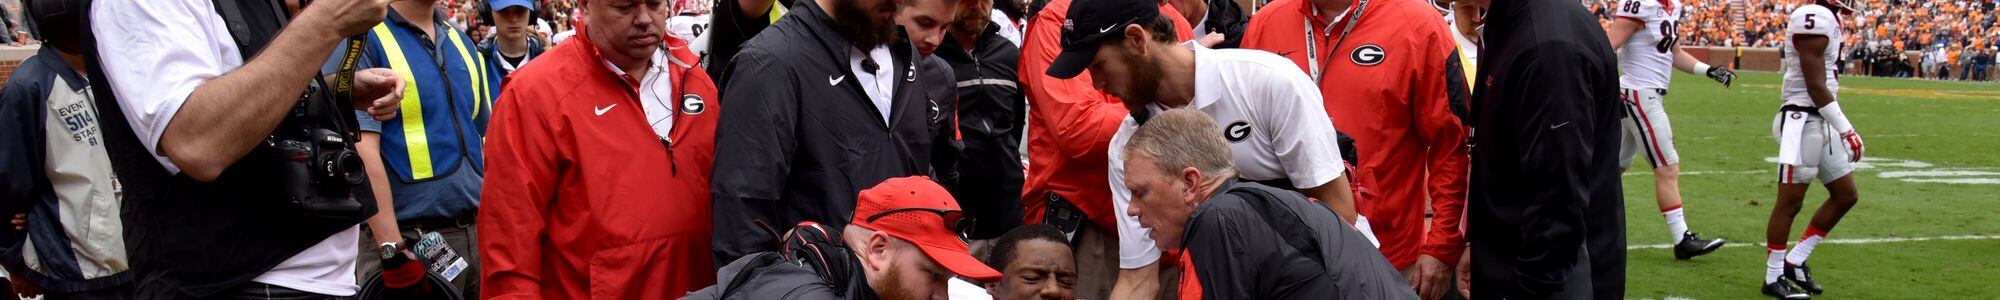 An 'unprecedented' recovery: Nick Chubb returns from horrific injury, back  into early Heisman consideration, Georgia Sports